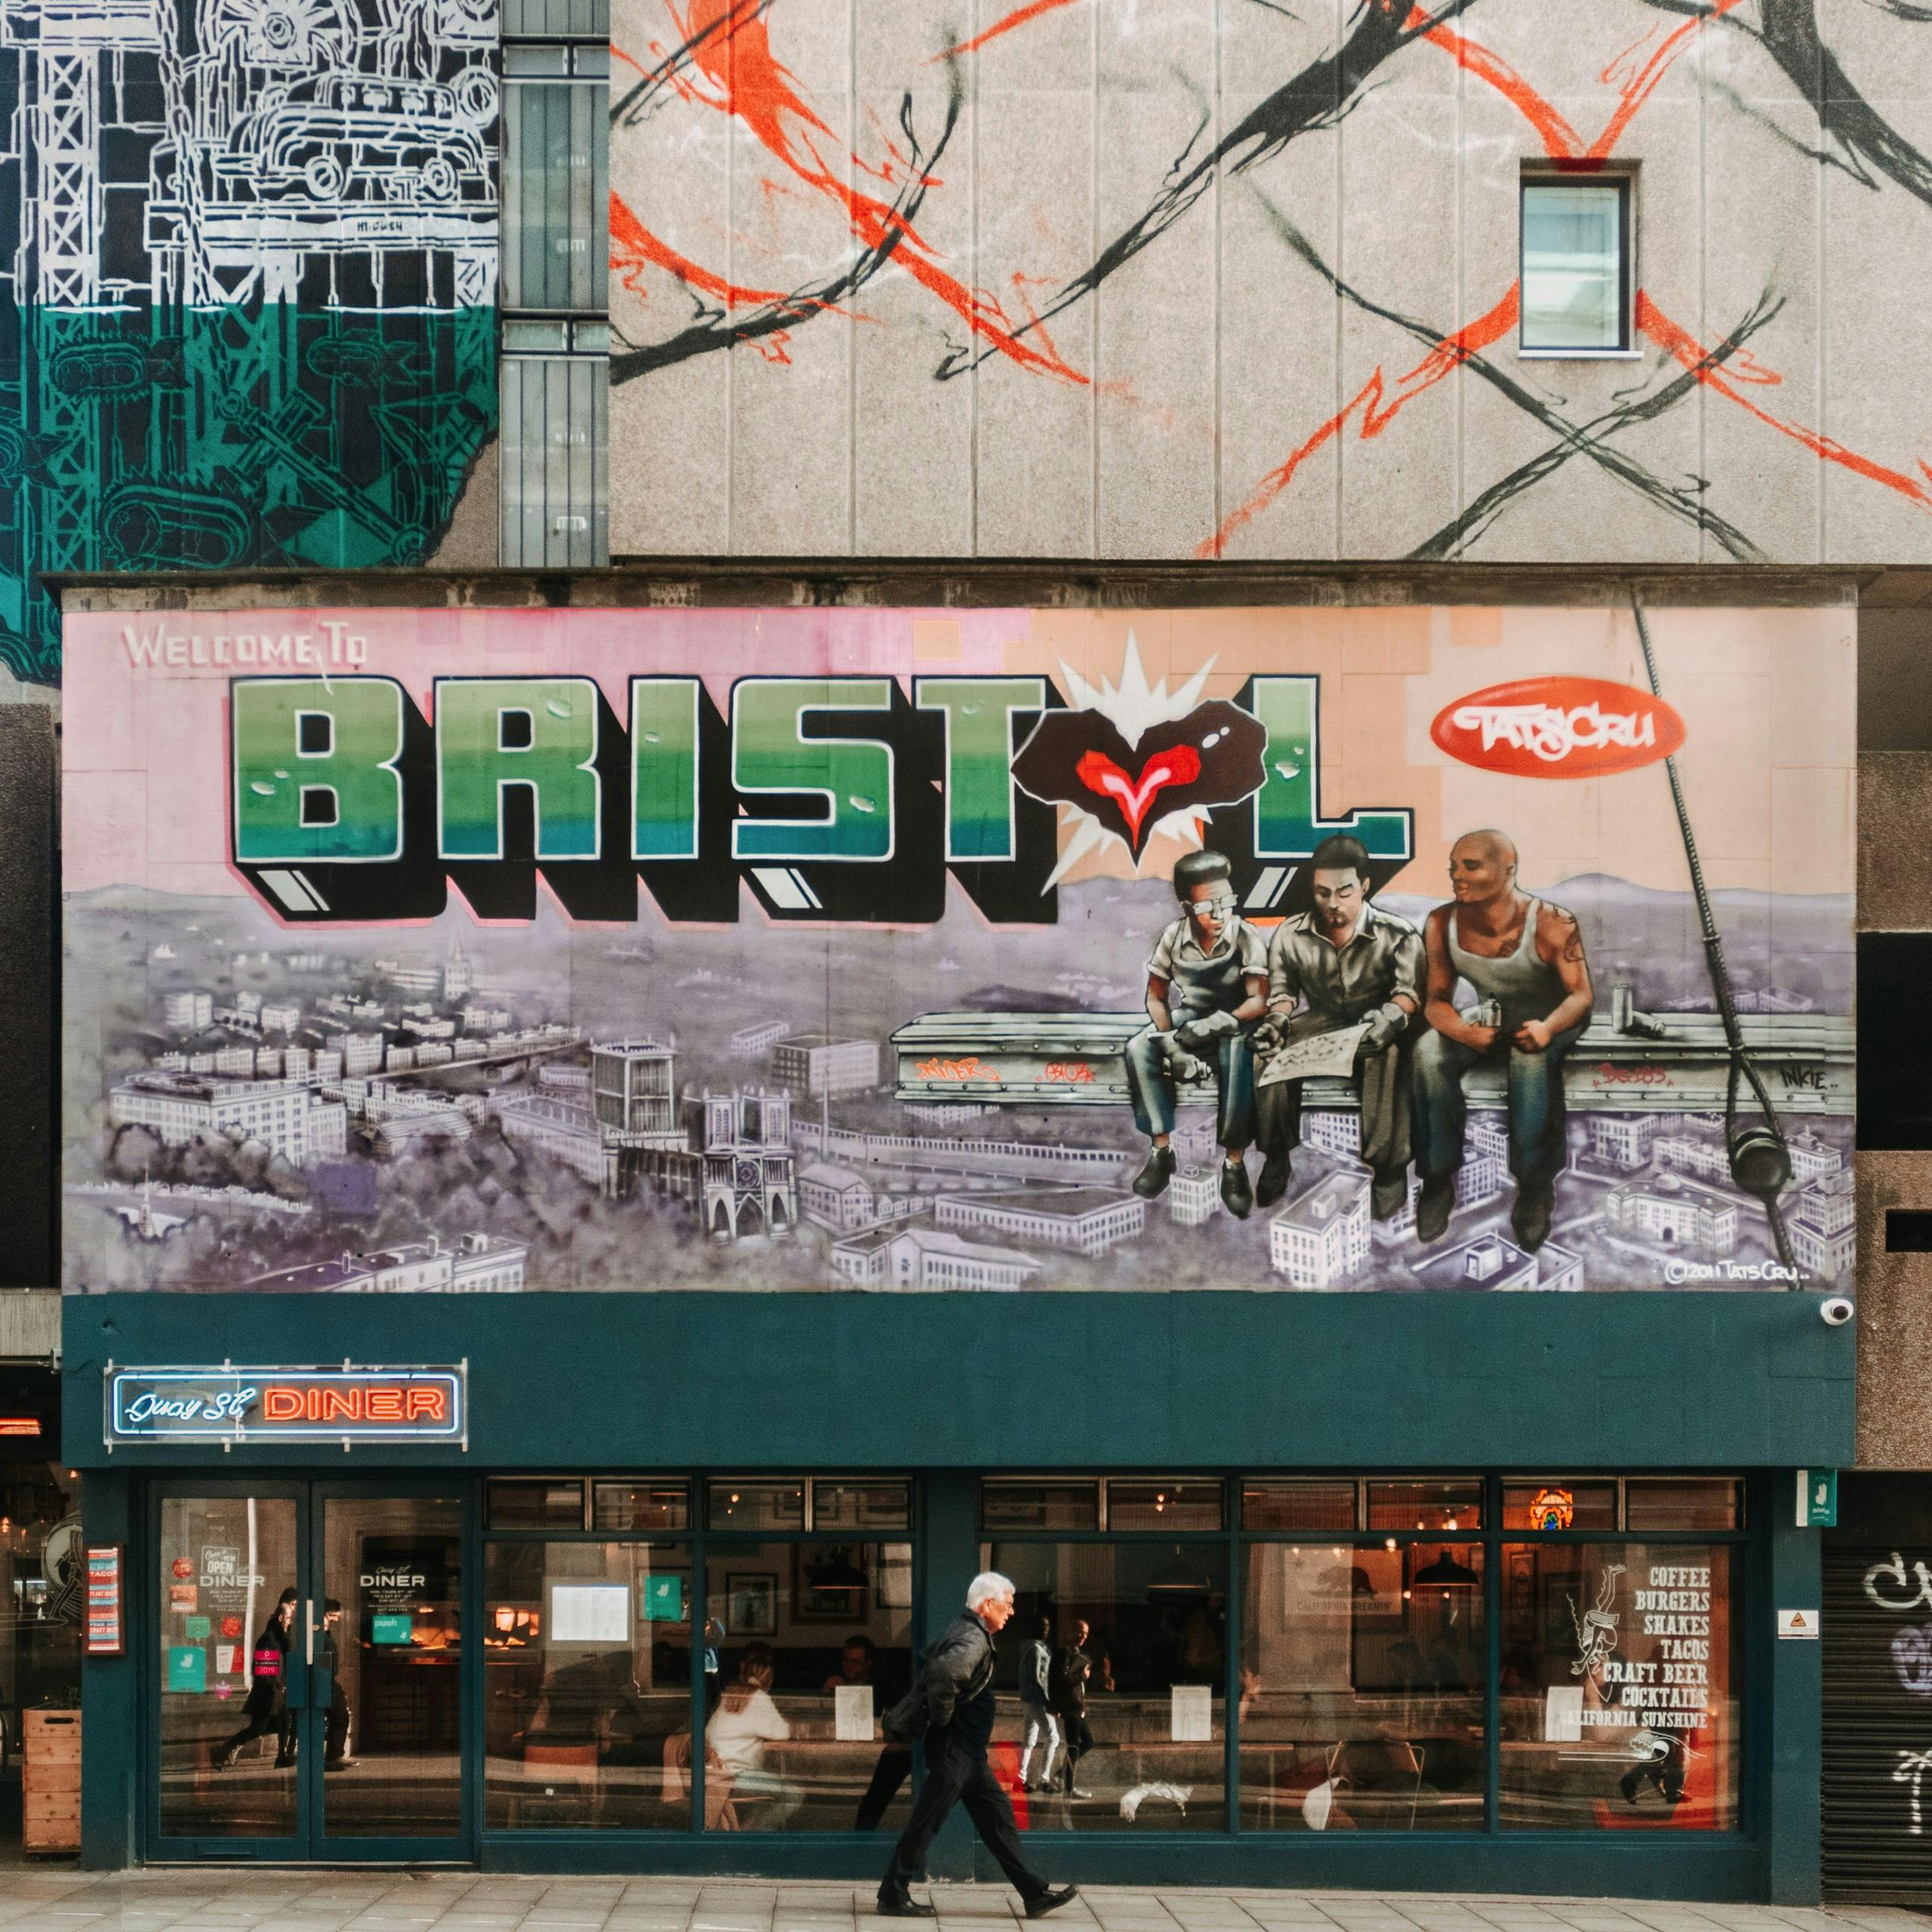 Bristol Street Art with Banksy and Capital of Graffiti exploration game